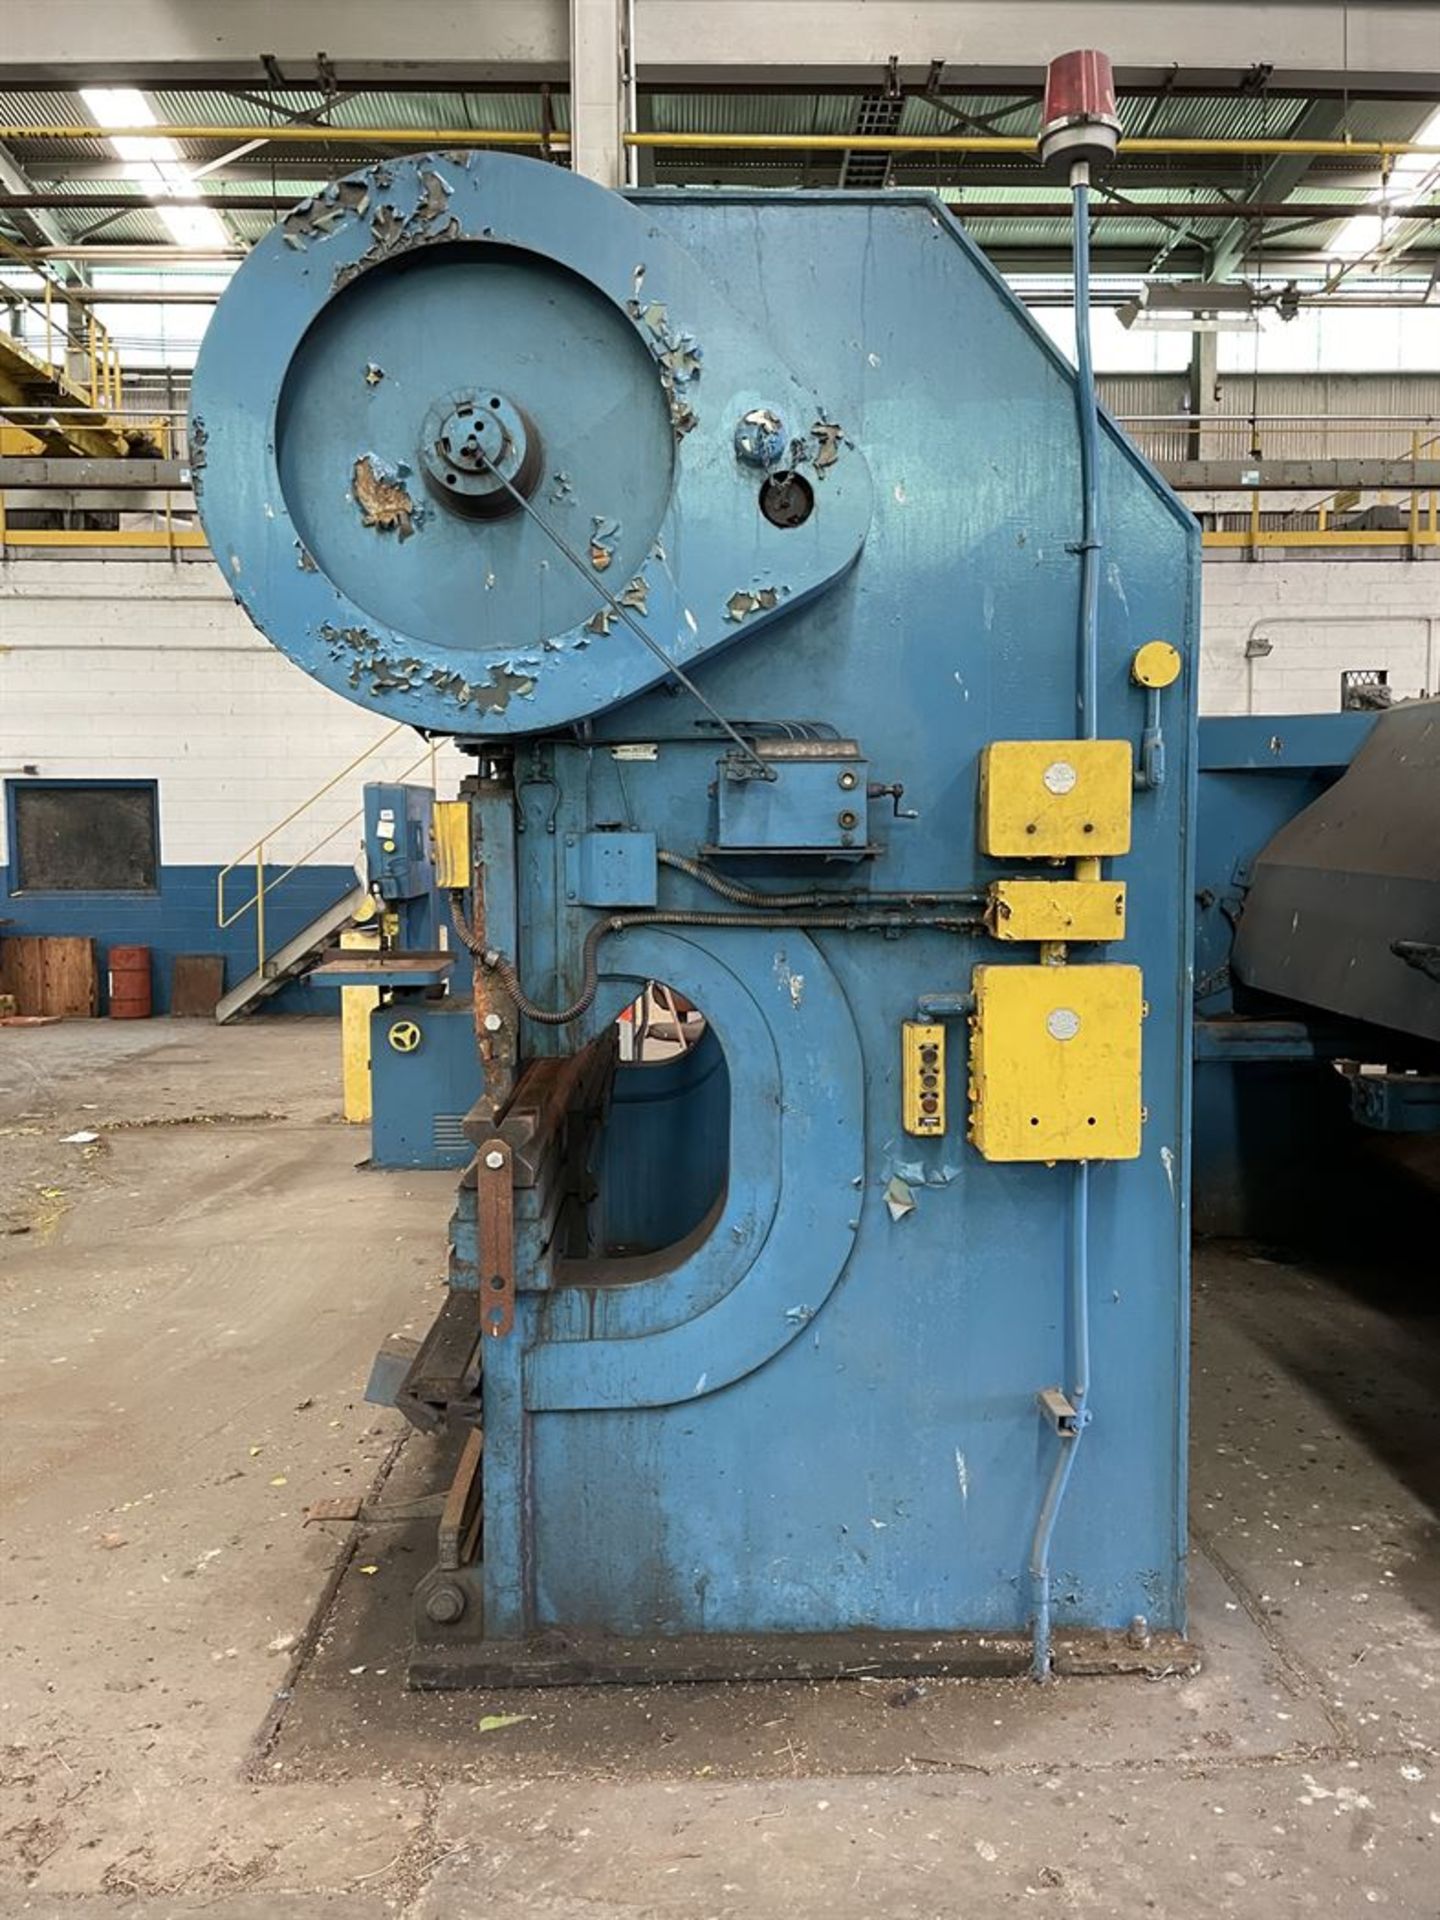 STEELWELD H3 1/2-8 Press Brake, s/n M-620J, 10' x 1/4" (Condition Unknown) - Image 3 of 5